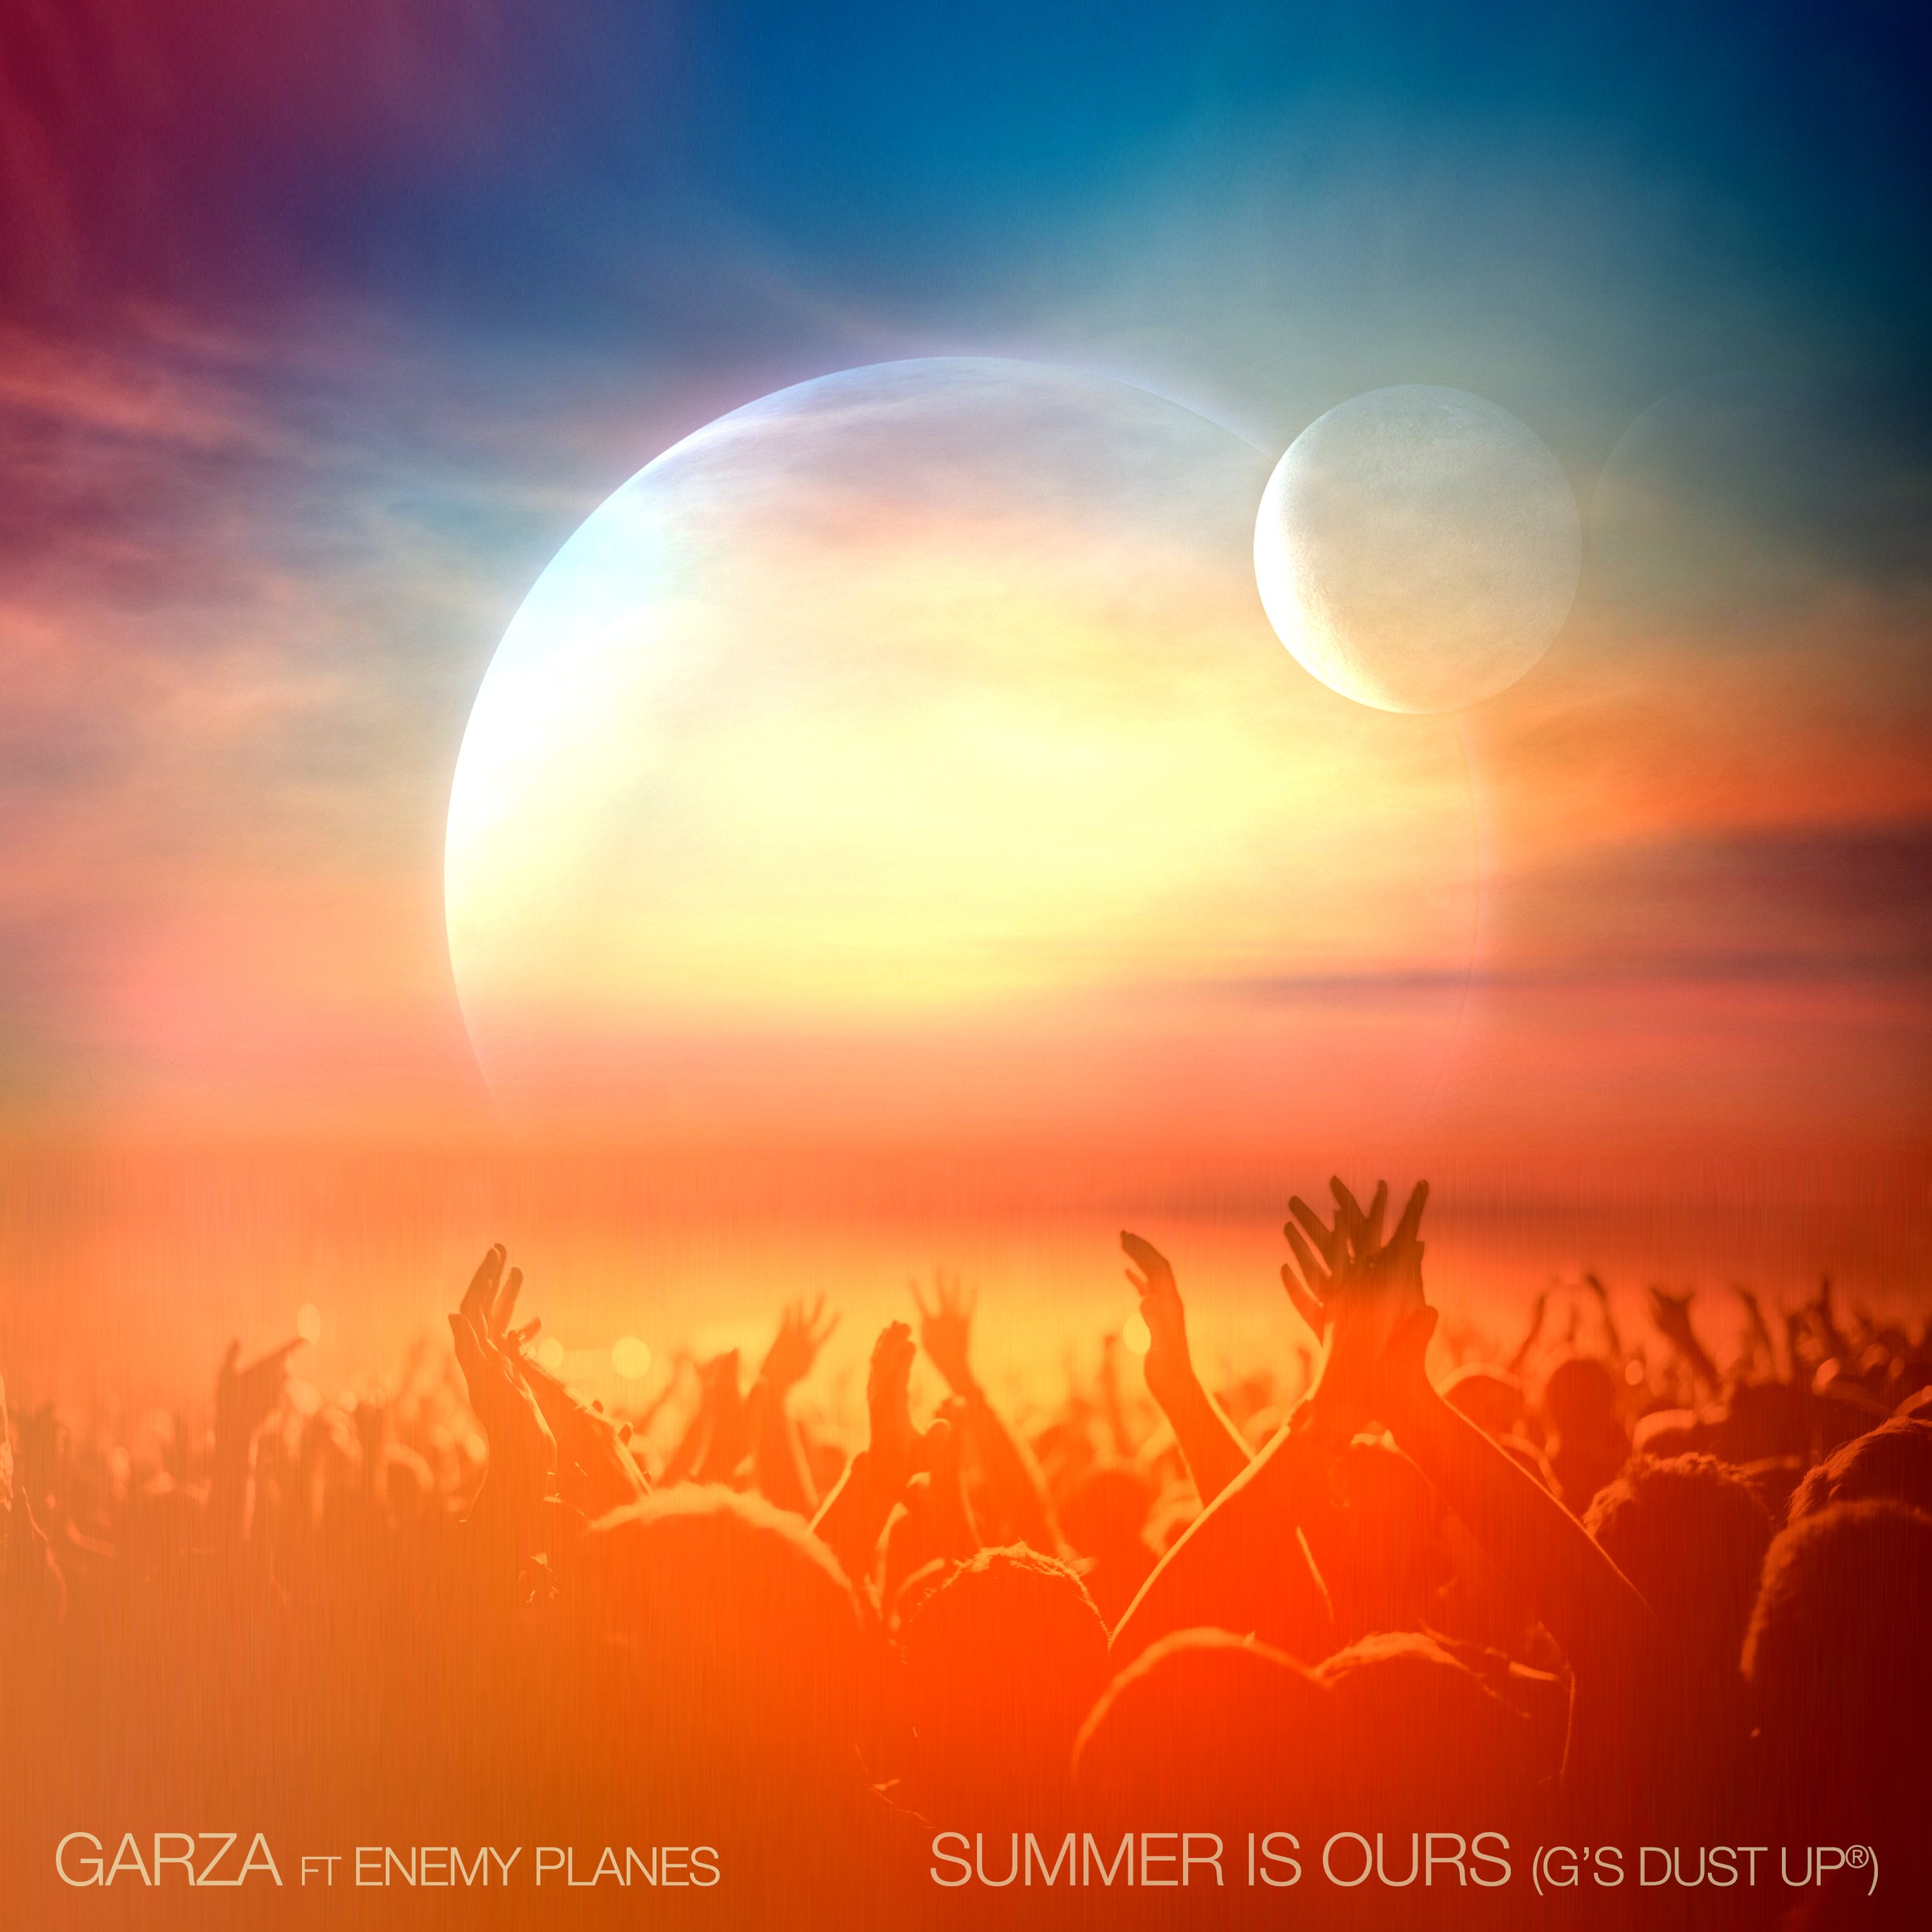 GARZA feat. ENEMY PLANES - “Summer Is Ours”